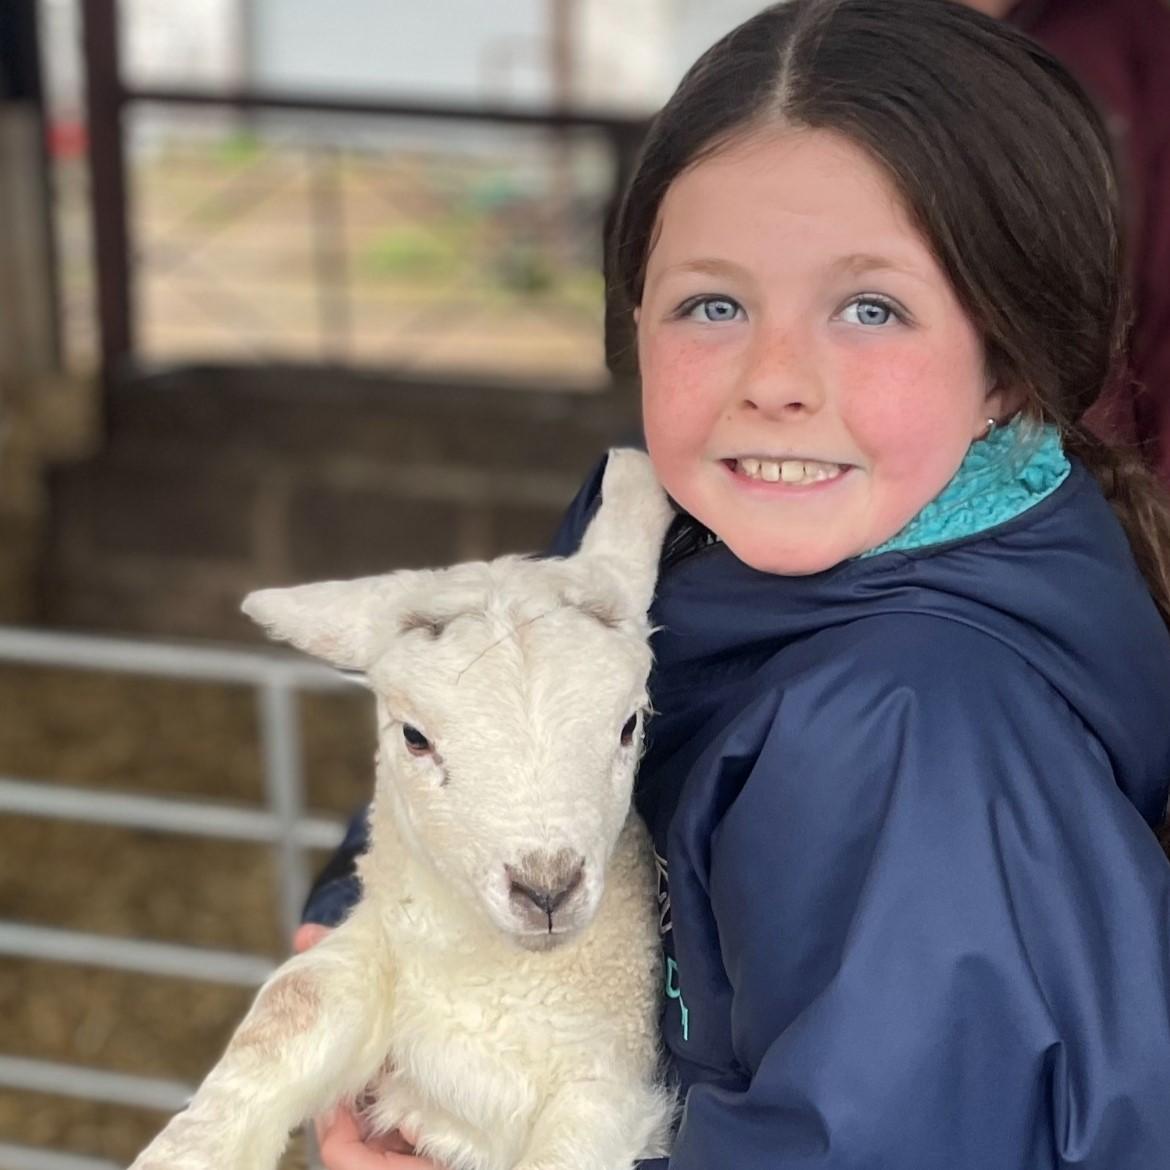 Jacqueline McInally - This is Jessica aged 10 with her namesake Jessica the lamb. Jessica the lamb is the first lamb she has ever delivered.